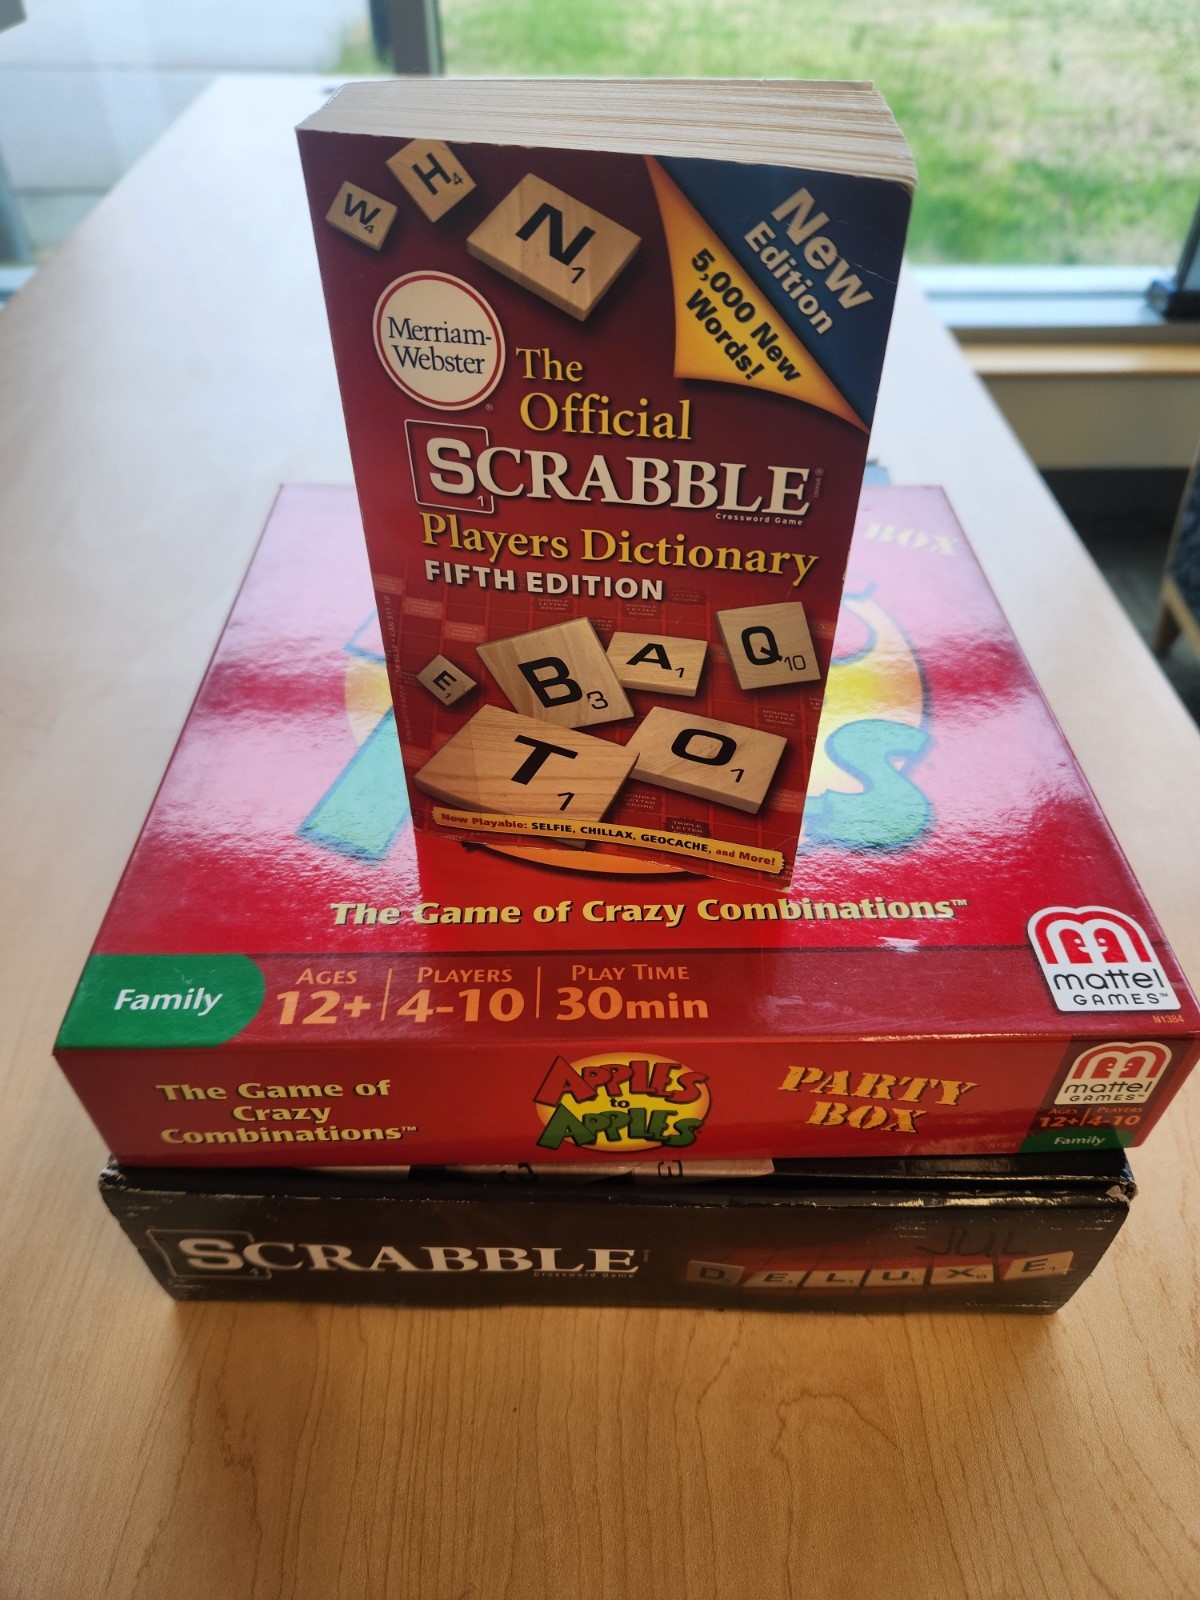 Scrabble Dictionary on top of Apples to Apples game and Scrabble game.